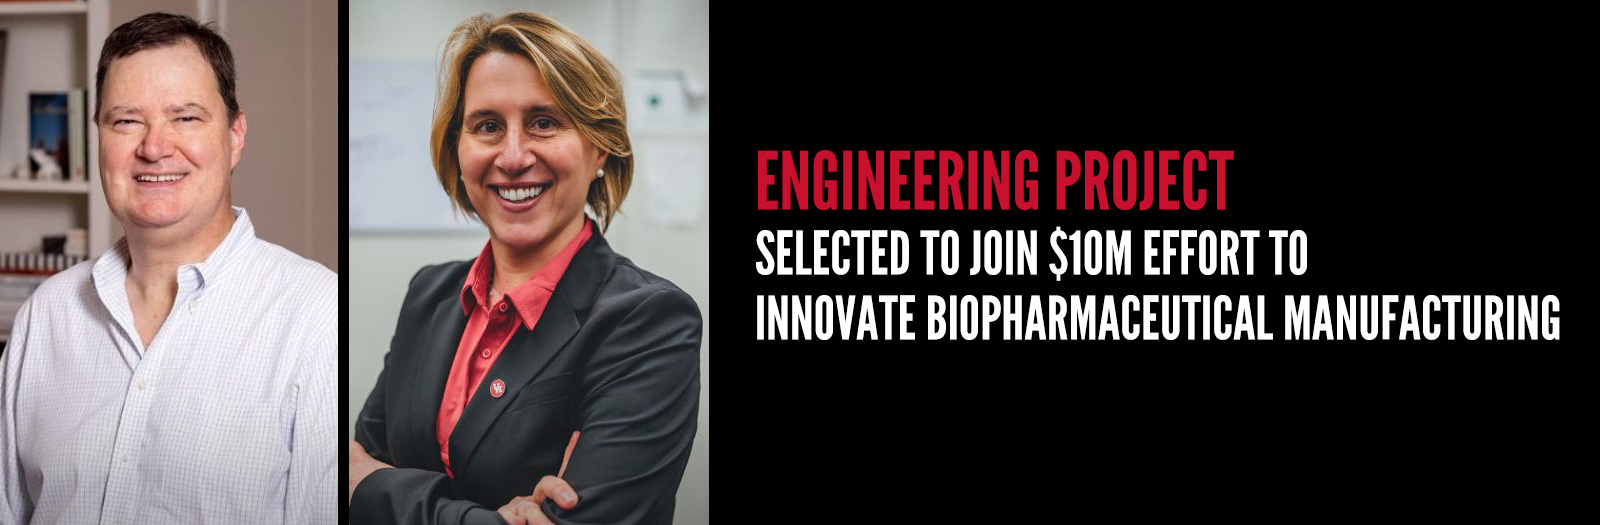 Engineering Project Selected to Join $10M Effort to Innovate Biopharmaceutical Manufacturing